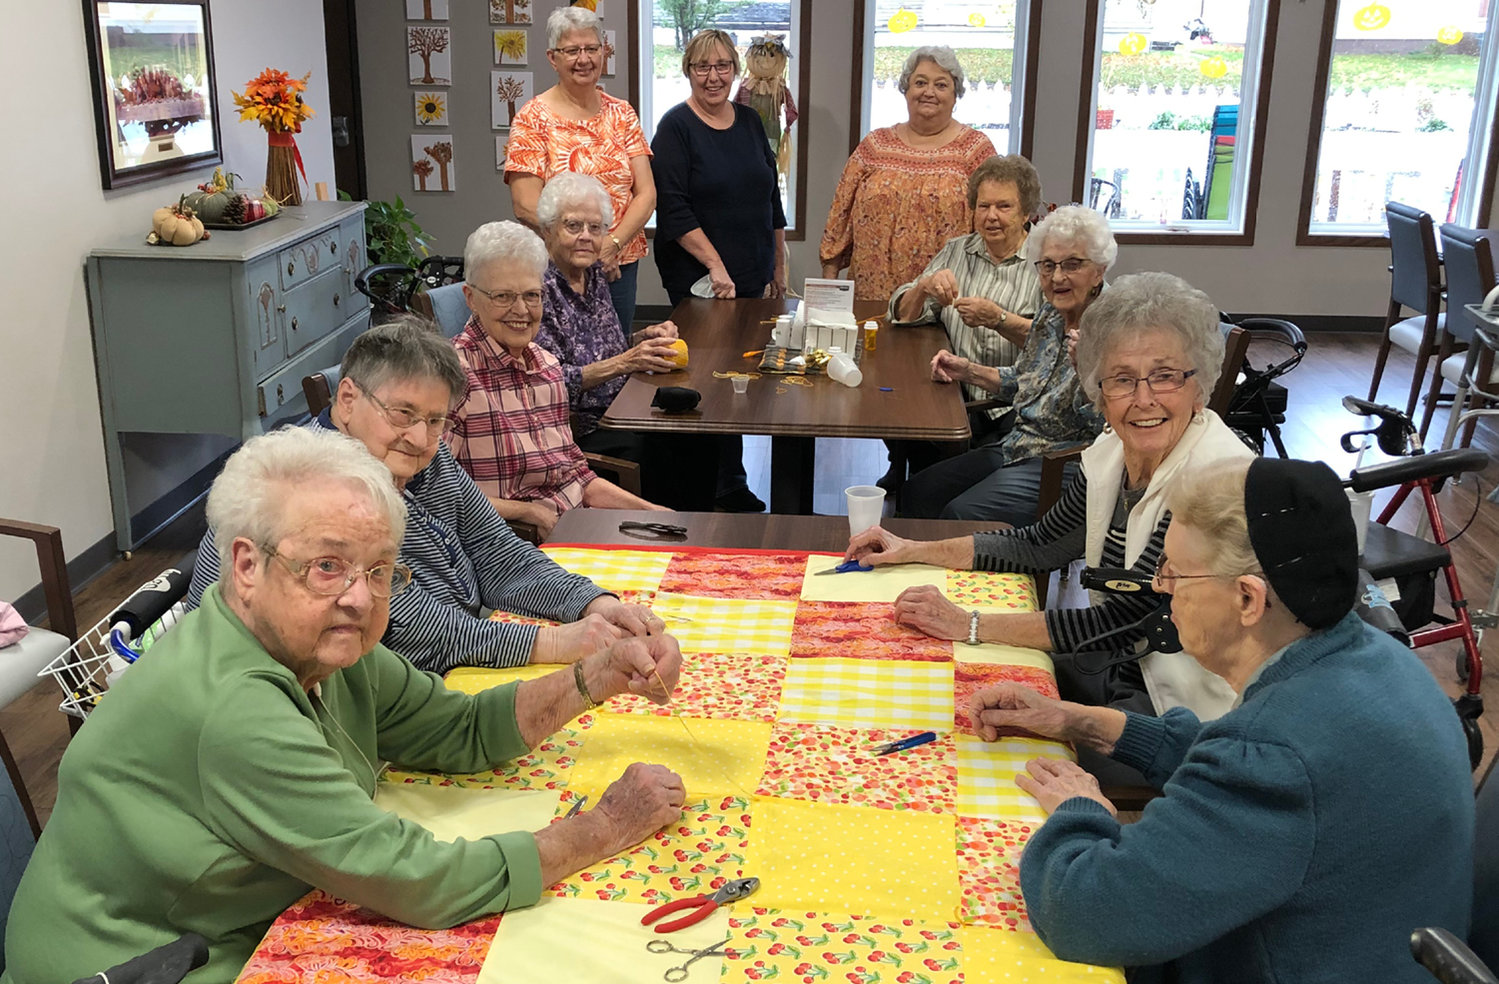 Busy quilting are Joyce Schoenfelder, front left (clockwise), Irene Petersen, Esther Weber, Laurie Carmon, Glenda Haines, Cheryl Palmlund, Marsha Brown, Kay Hendricks, Pearl Coughlin, Margaret Anderson and Betty Penner.